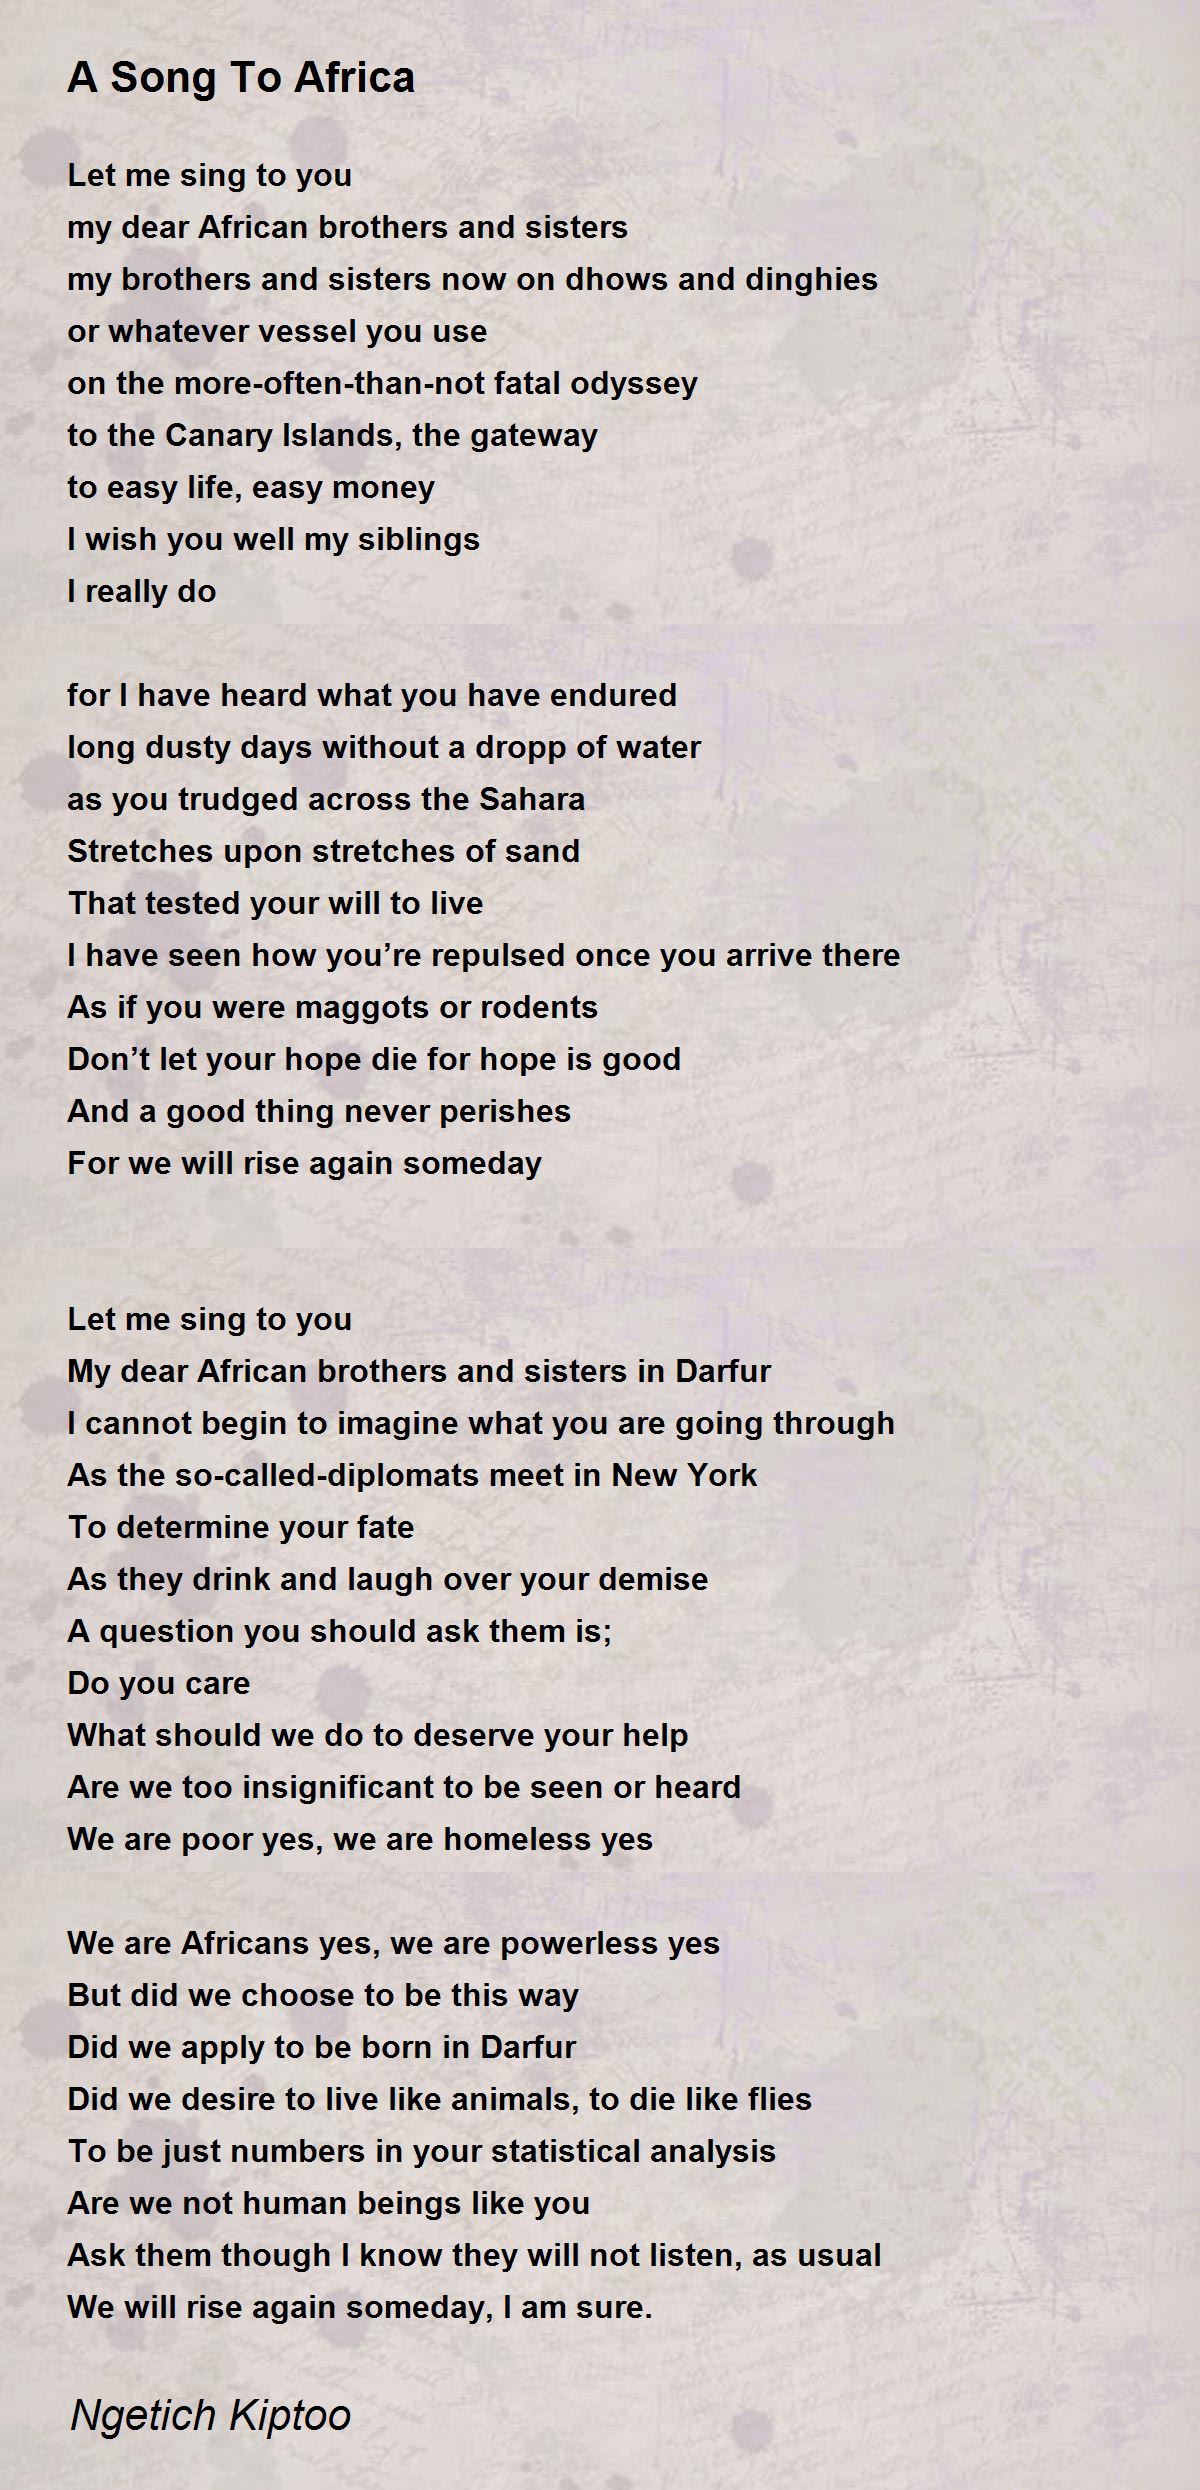 A Song To Africa - A Song To Africa Poem by Ngetich Kiptoo